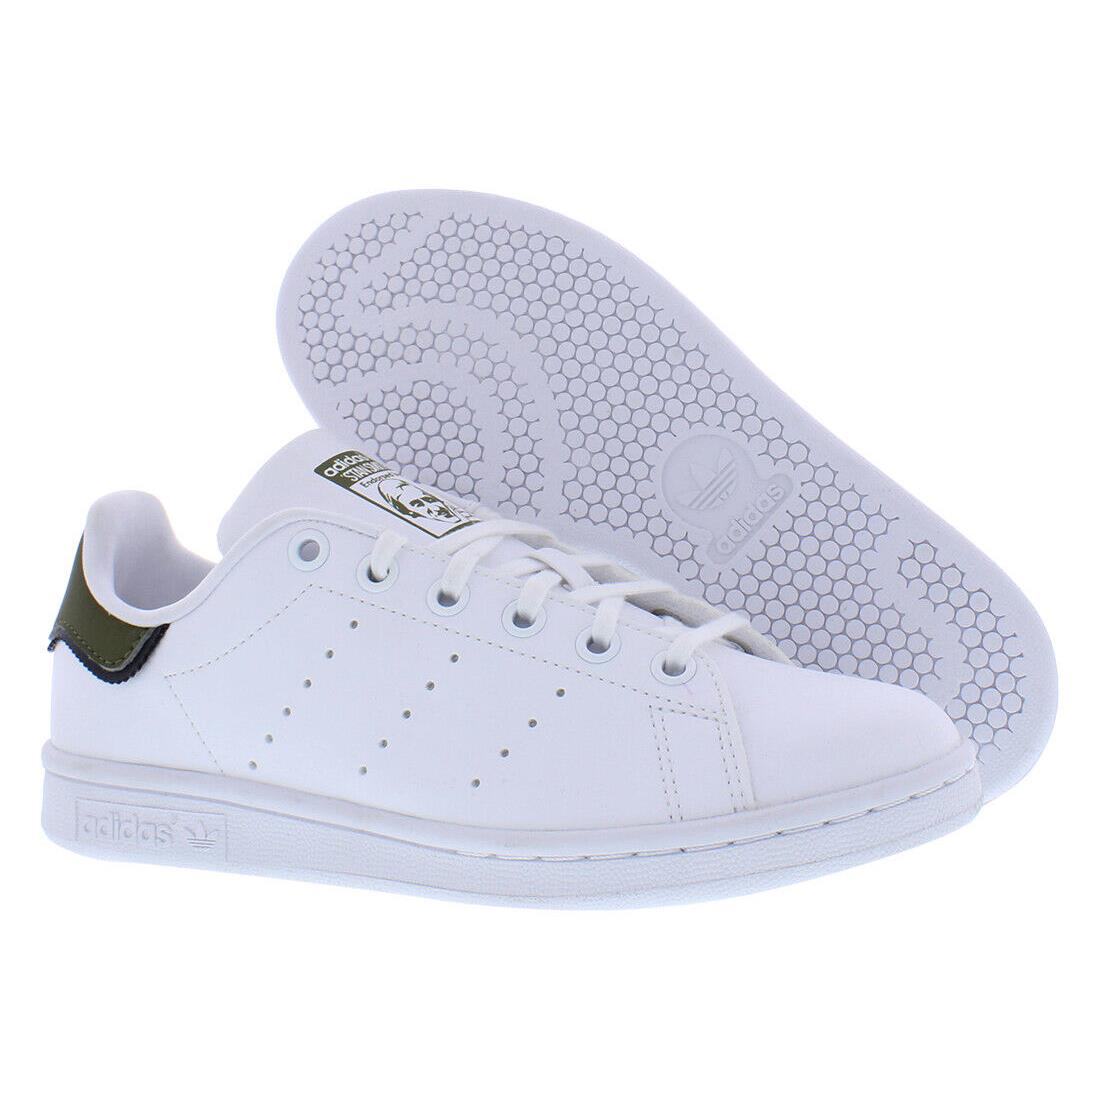 Adidas Stan Smith GS Girls Shoes Size 4.5 Color: Footwear - Footwear White/Focoli/Footwear White, Main: White